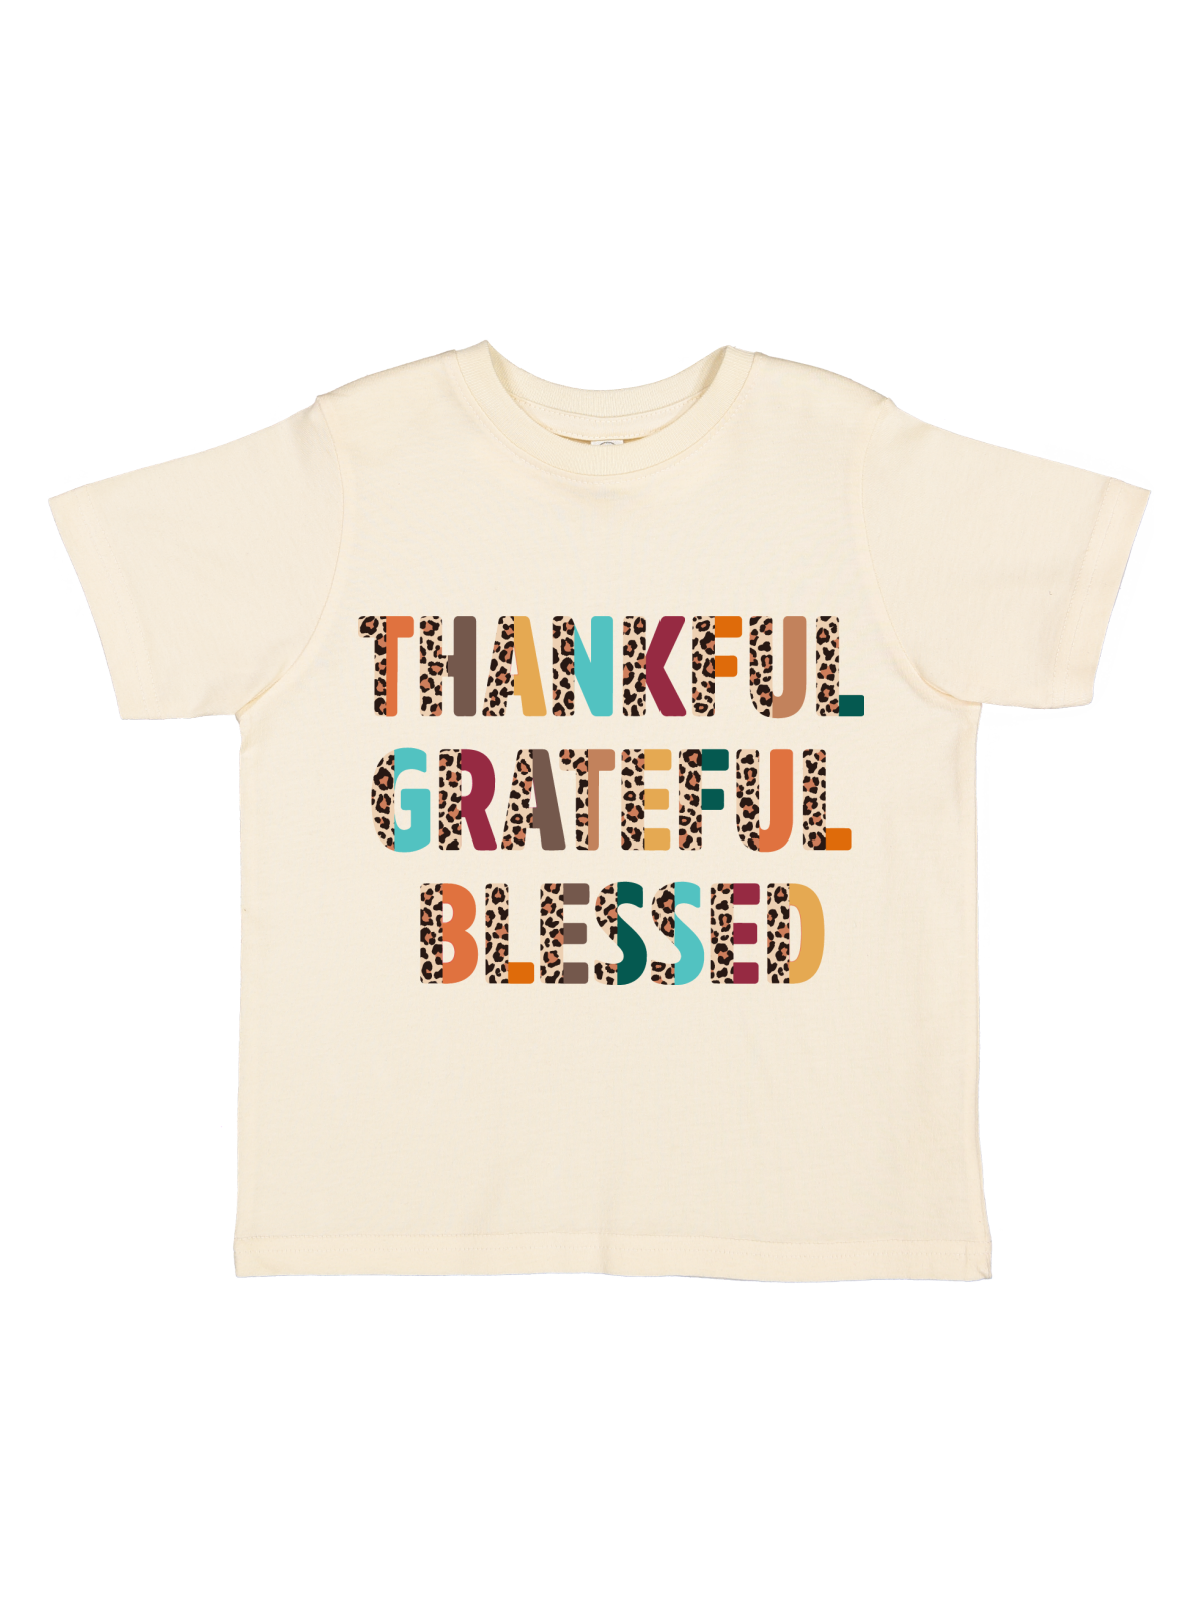 thankful, grateful, and blessed kids leopard thanksgiving shirt